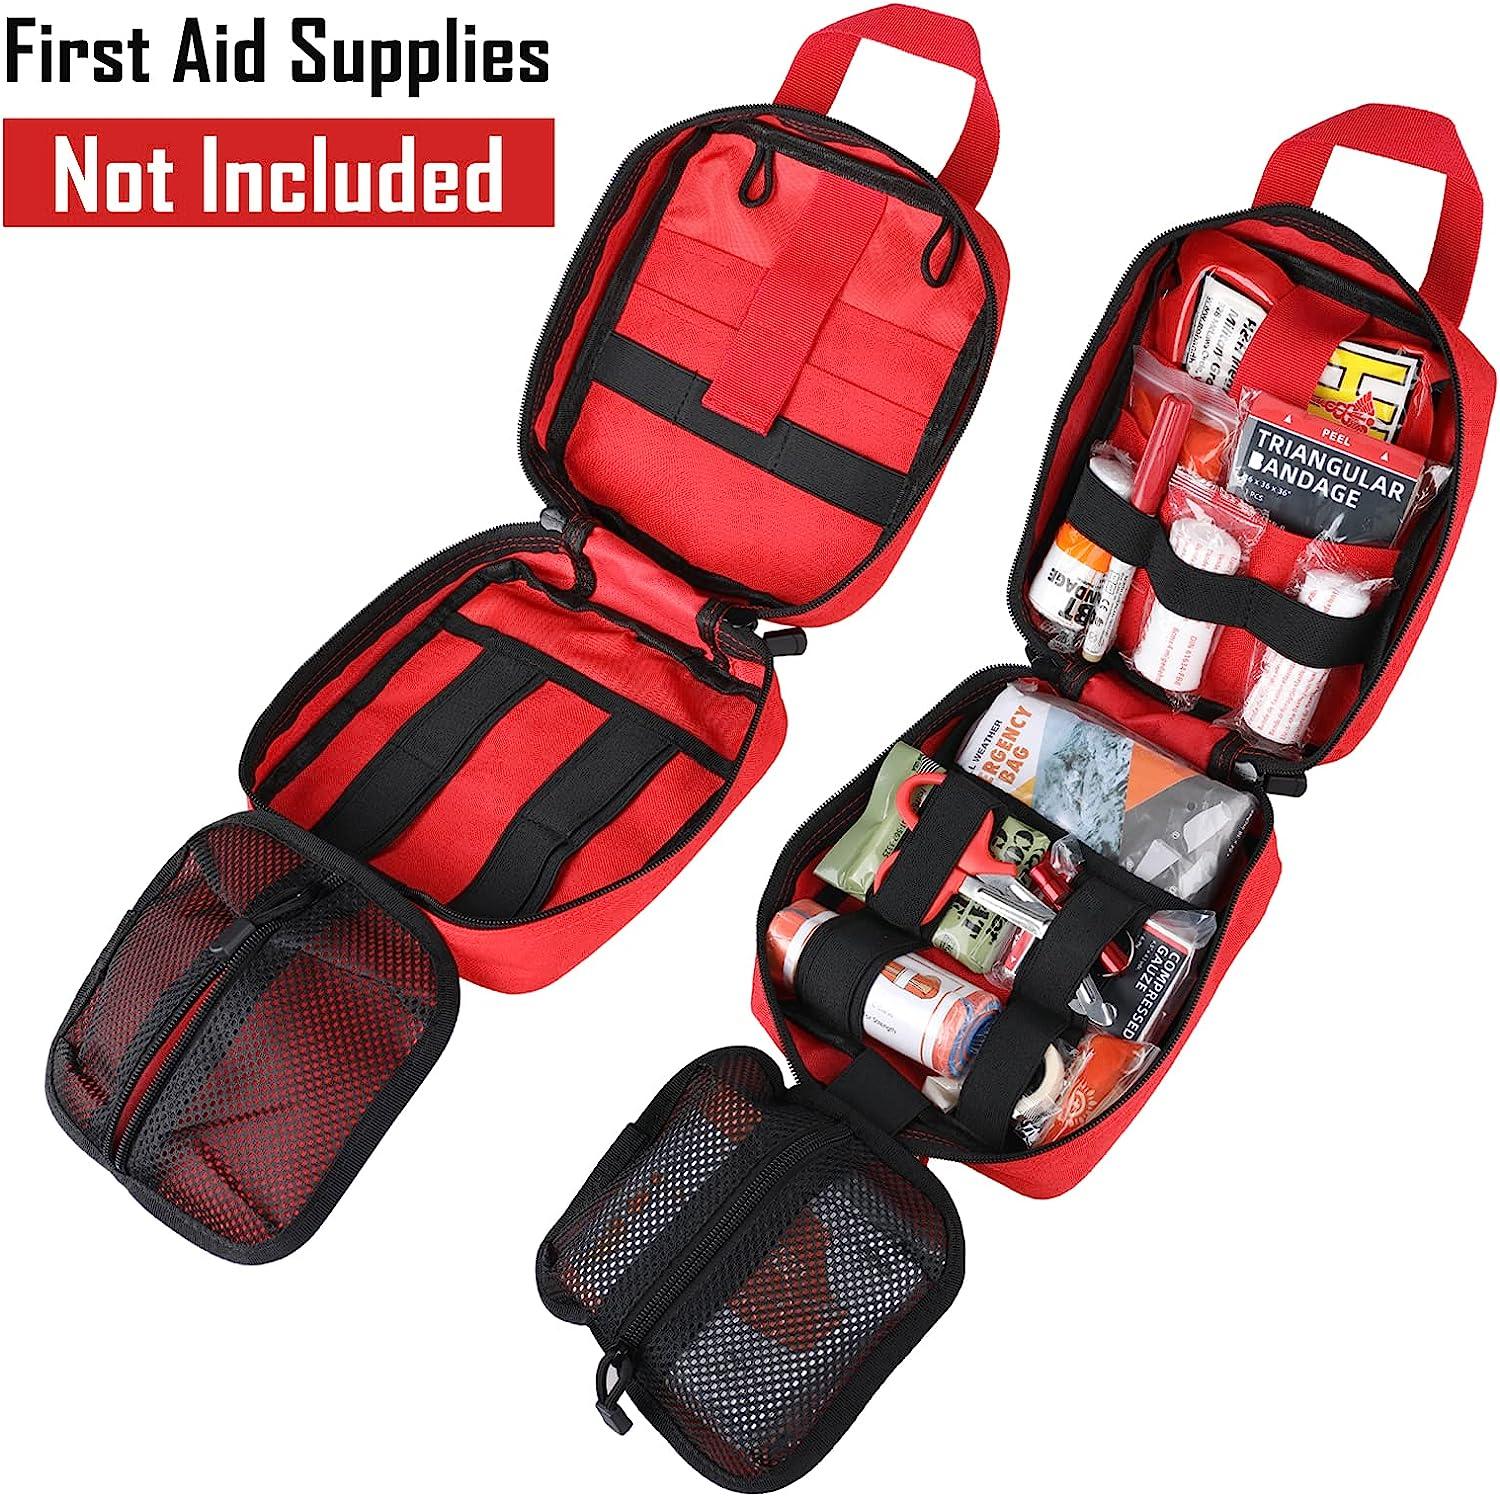 First Aid Kit Inside PVC Tactical Hook and Loop Patch | Red and White